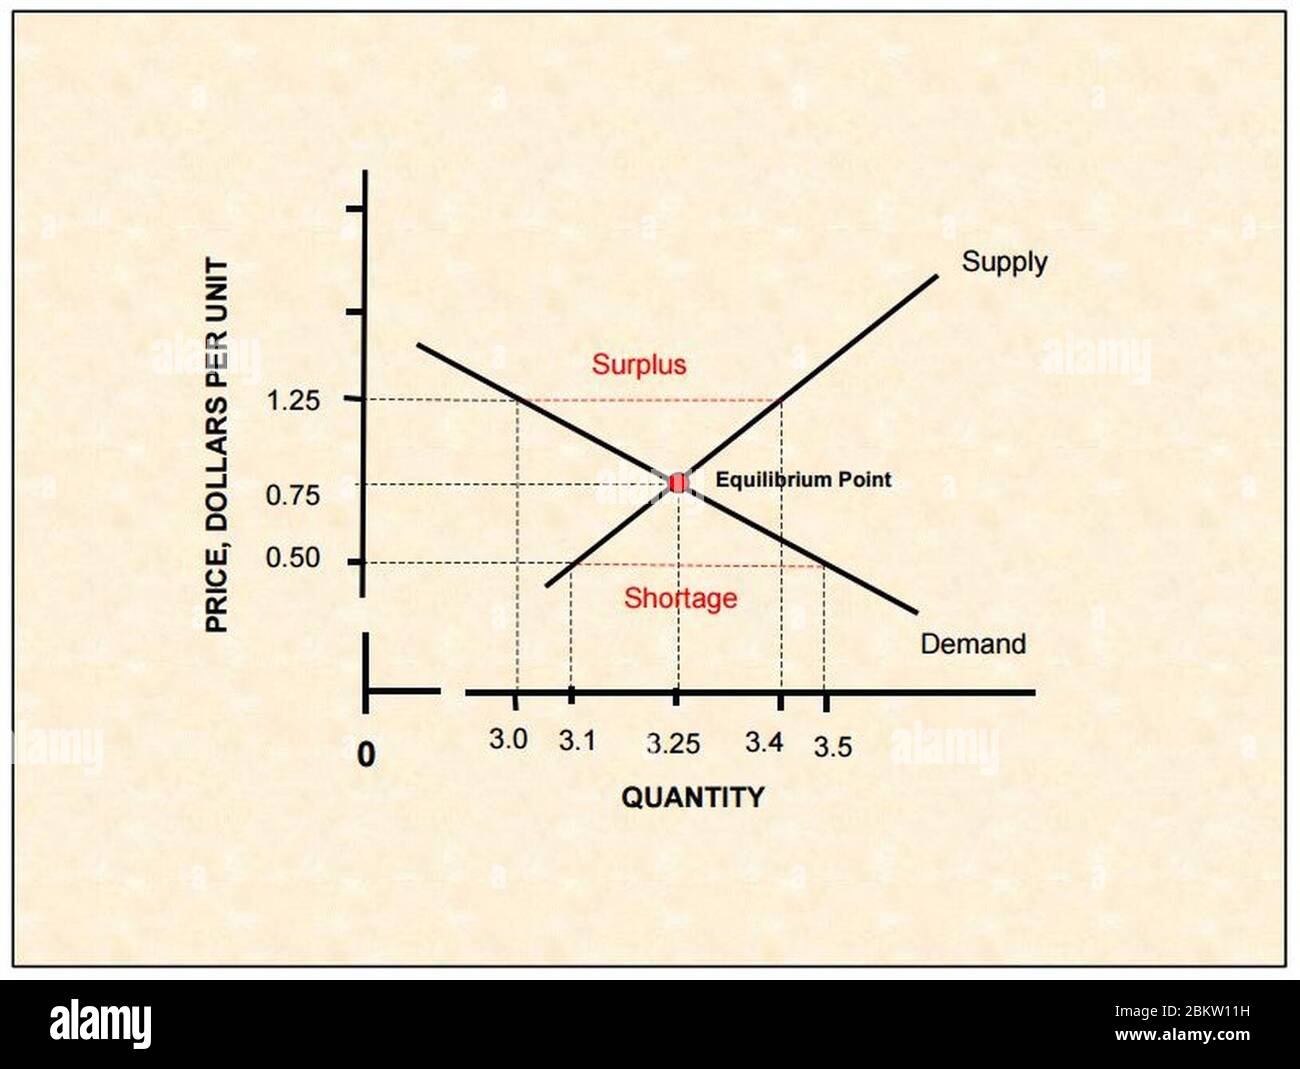 Hypothetical supply-demand situation for copper adapted from Truett and Truett 1982. Stock Photo